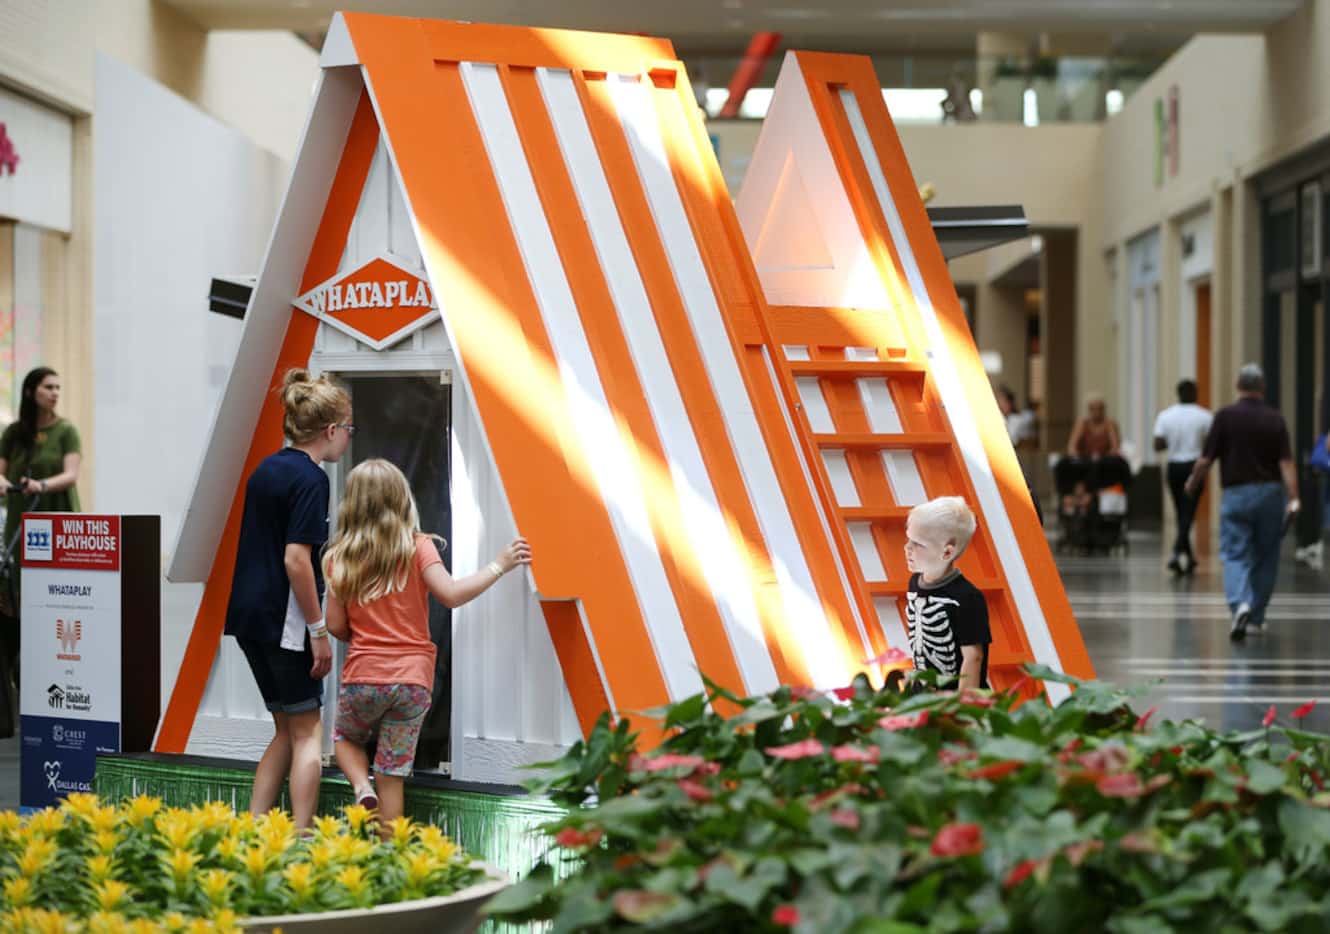 Children peer inside a playhouse on Friday that was made to look like a Whataburger and...